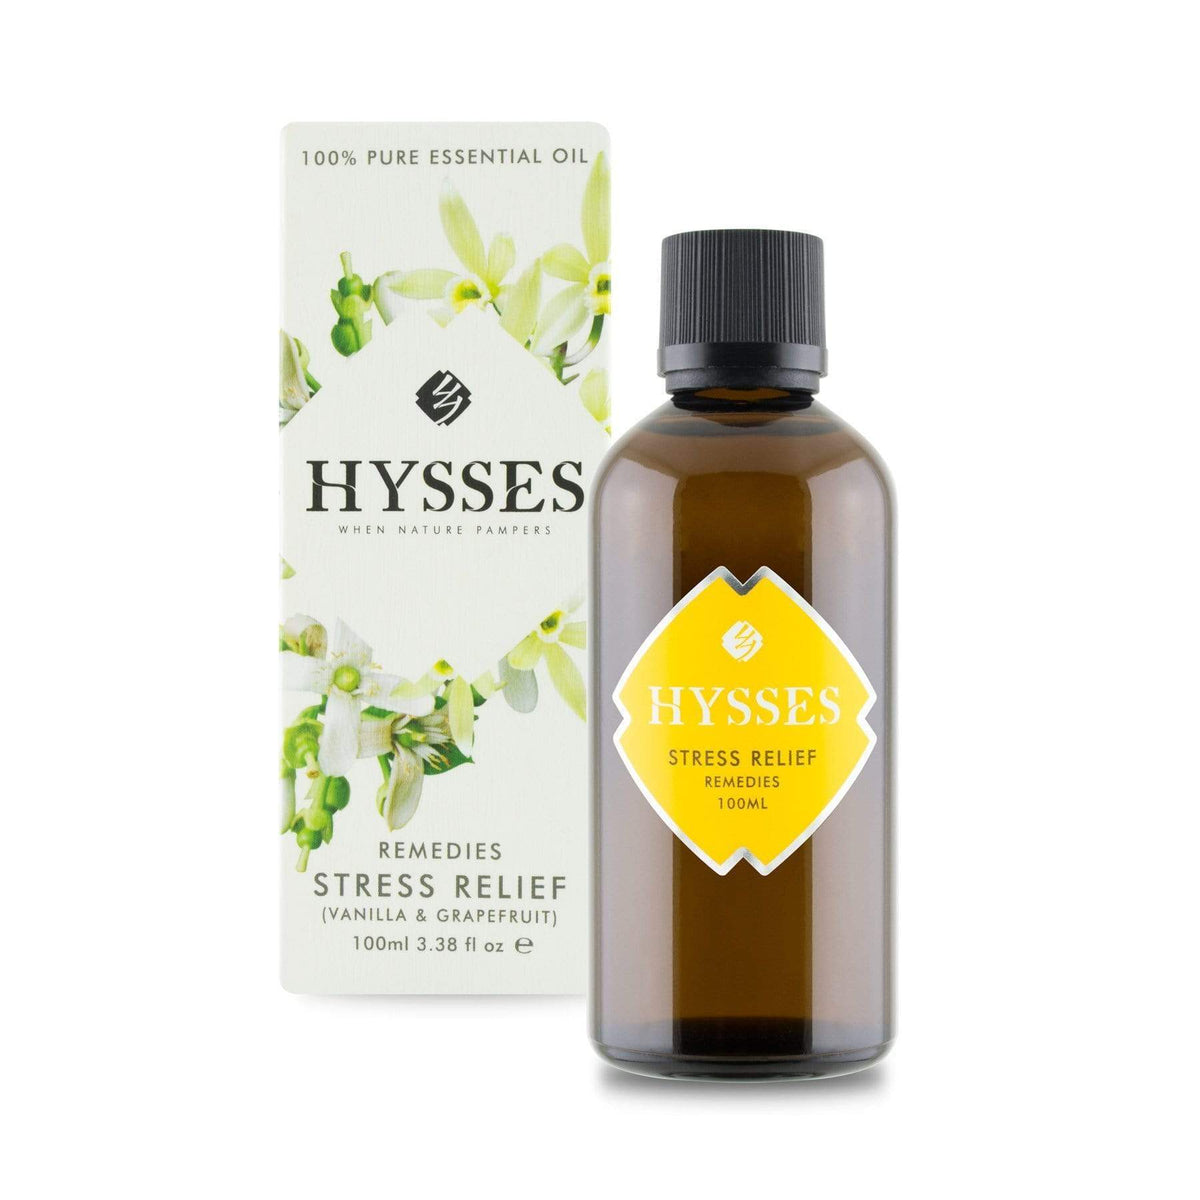 Hysses Essential Oil 100ml Remedies, Stress Relief